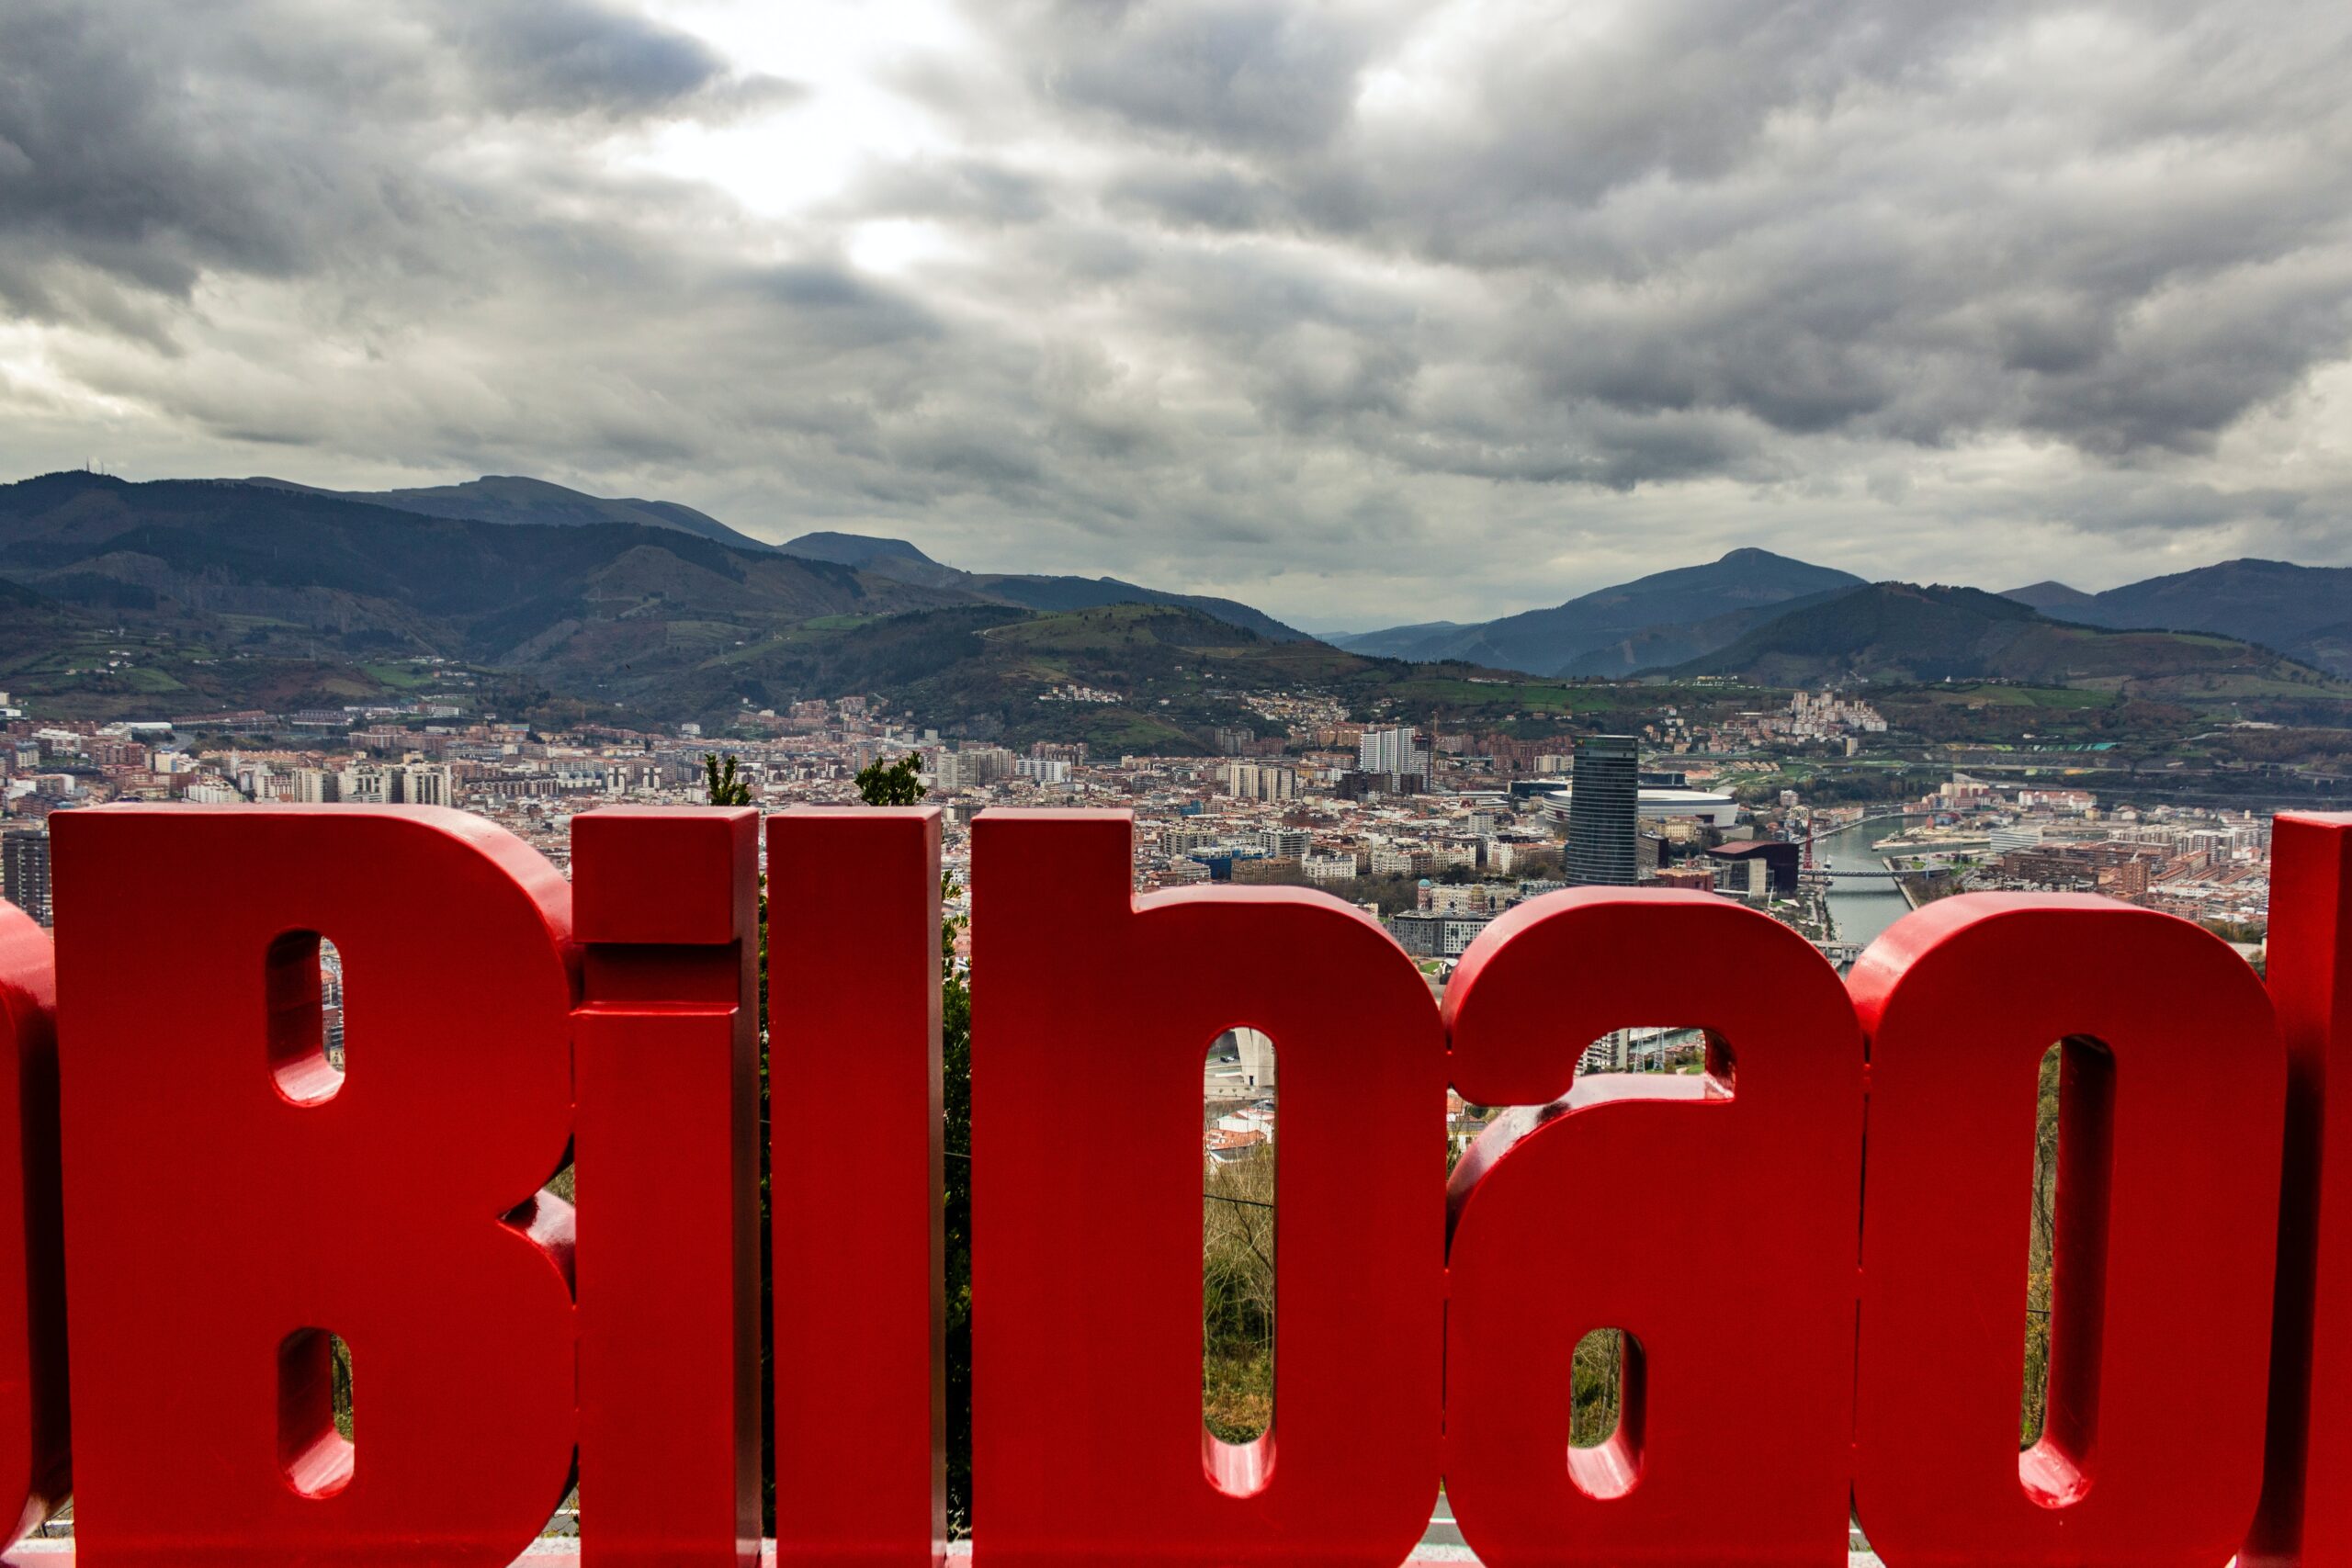 SAVE THE DATE: Joint event Energy Data Space Projects, Bilbao (SP), 7-8 November 20